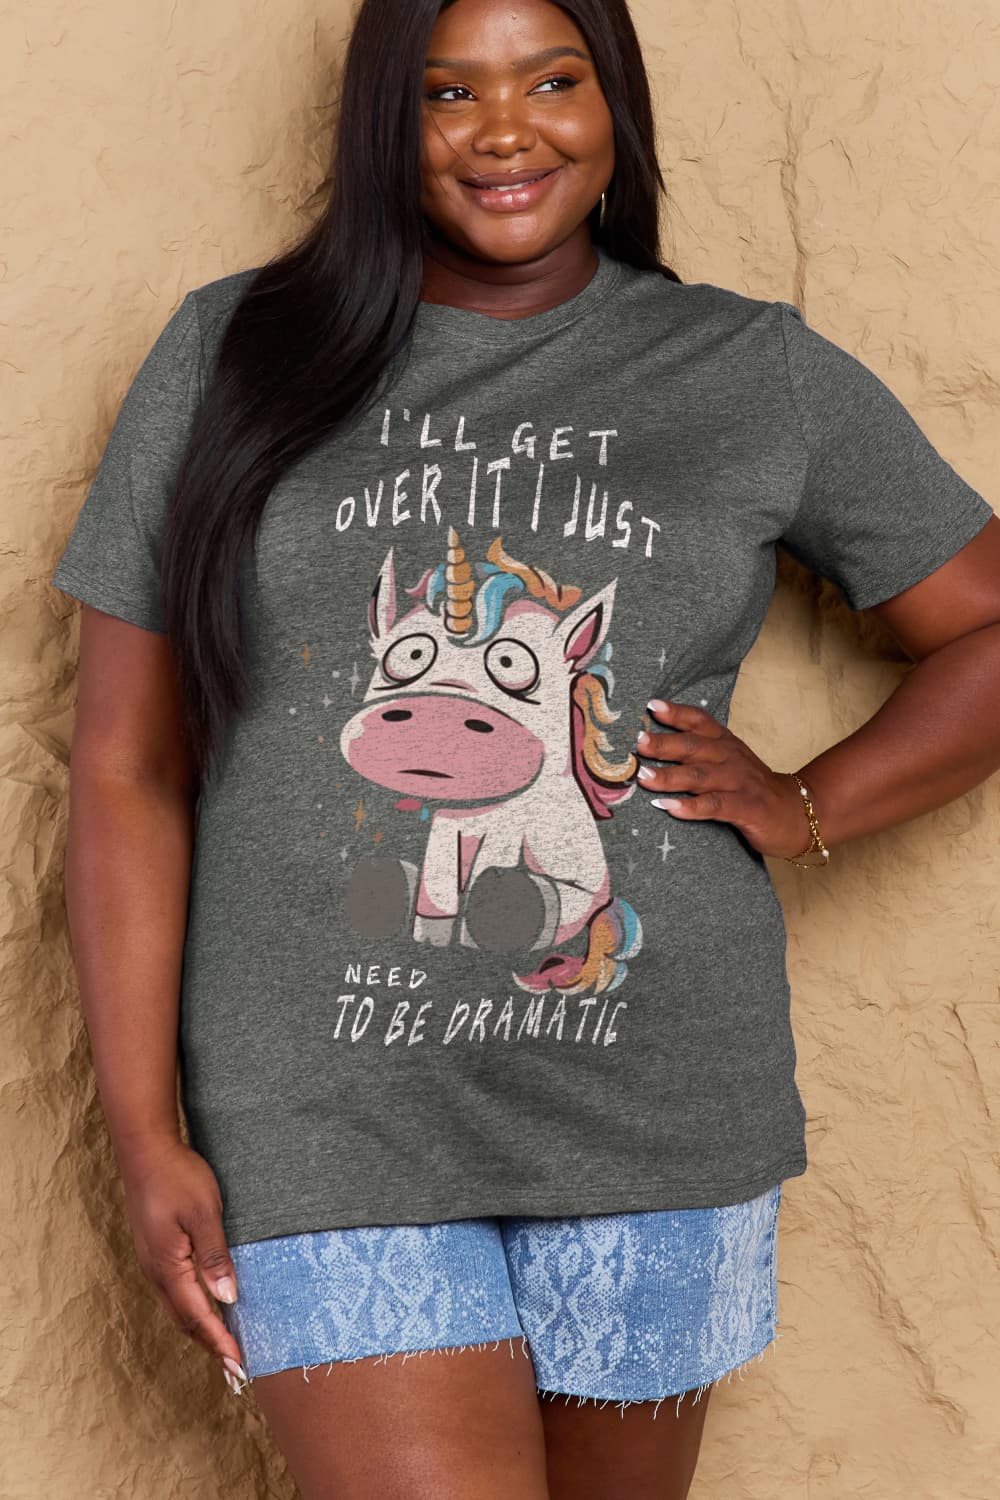 Full Size I’LL GET OVER IT I JUST NEED TO BE DRAMATIC Graphic Cotton Tee - Gray / S - T-Shirts - Shirts & Tops - 10